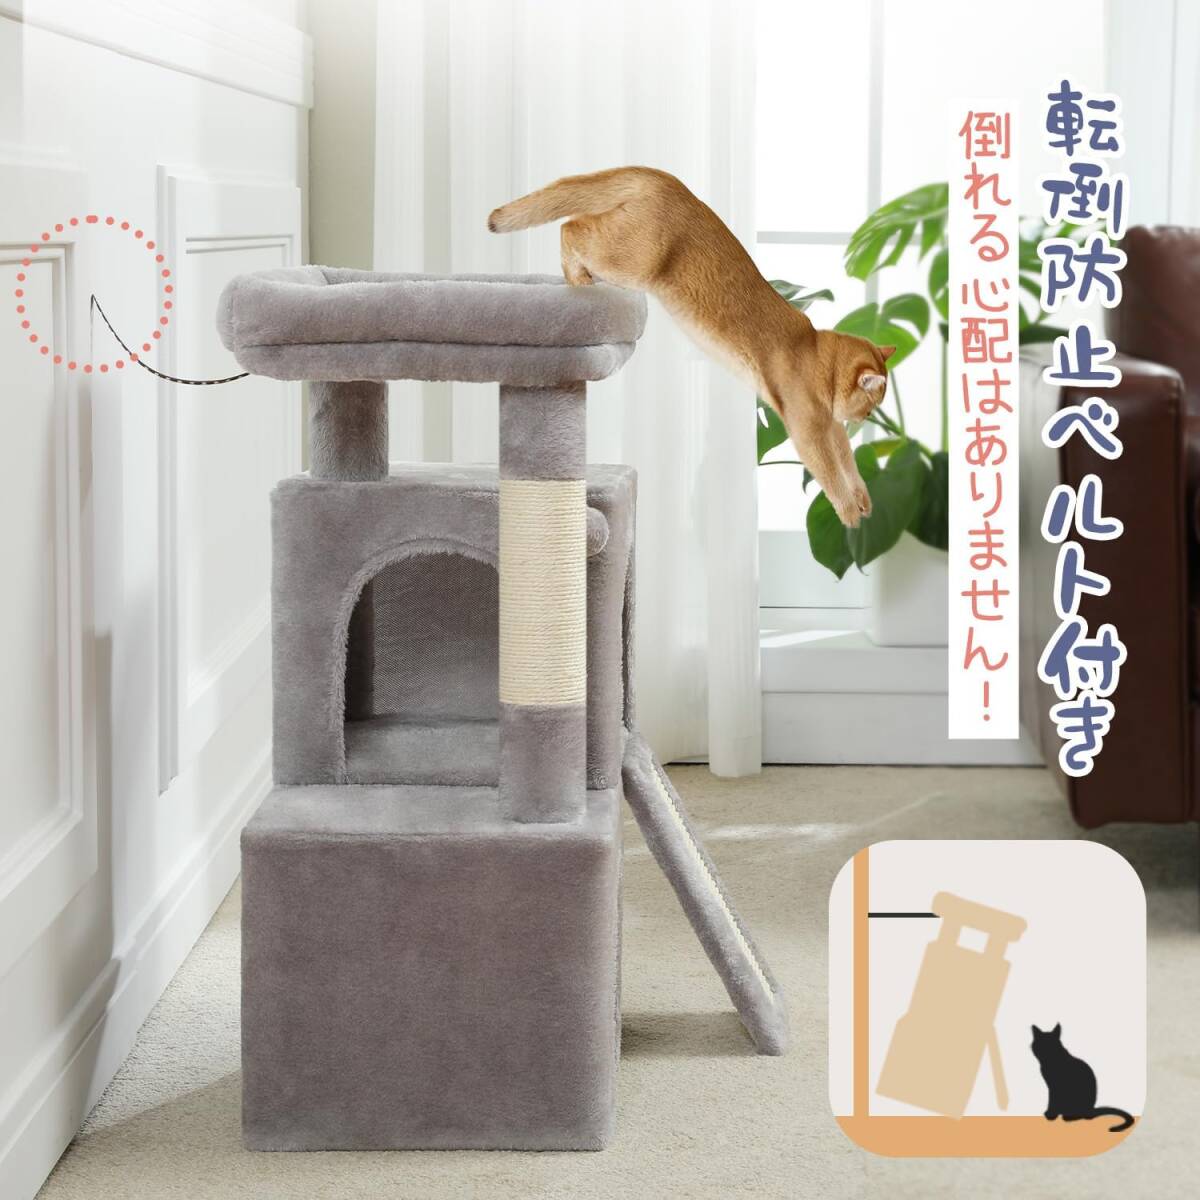  gray S PAWZ Road cat tower low . low Mini compact nail sharpen flax cord cat tower small size .. put cat house 2.